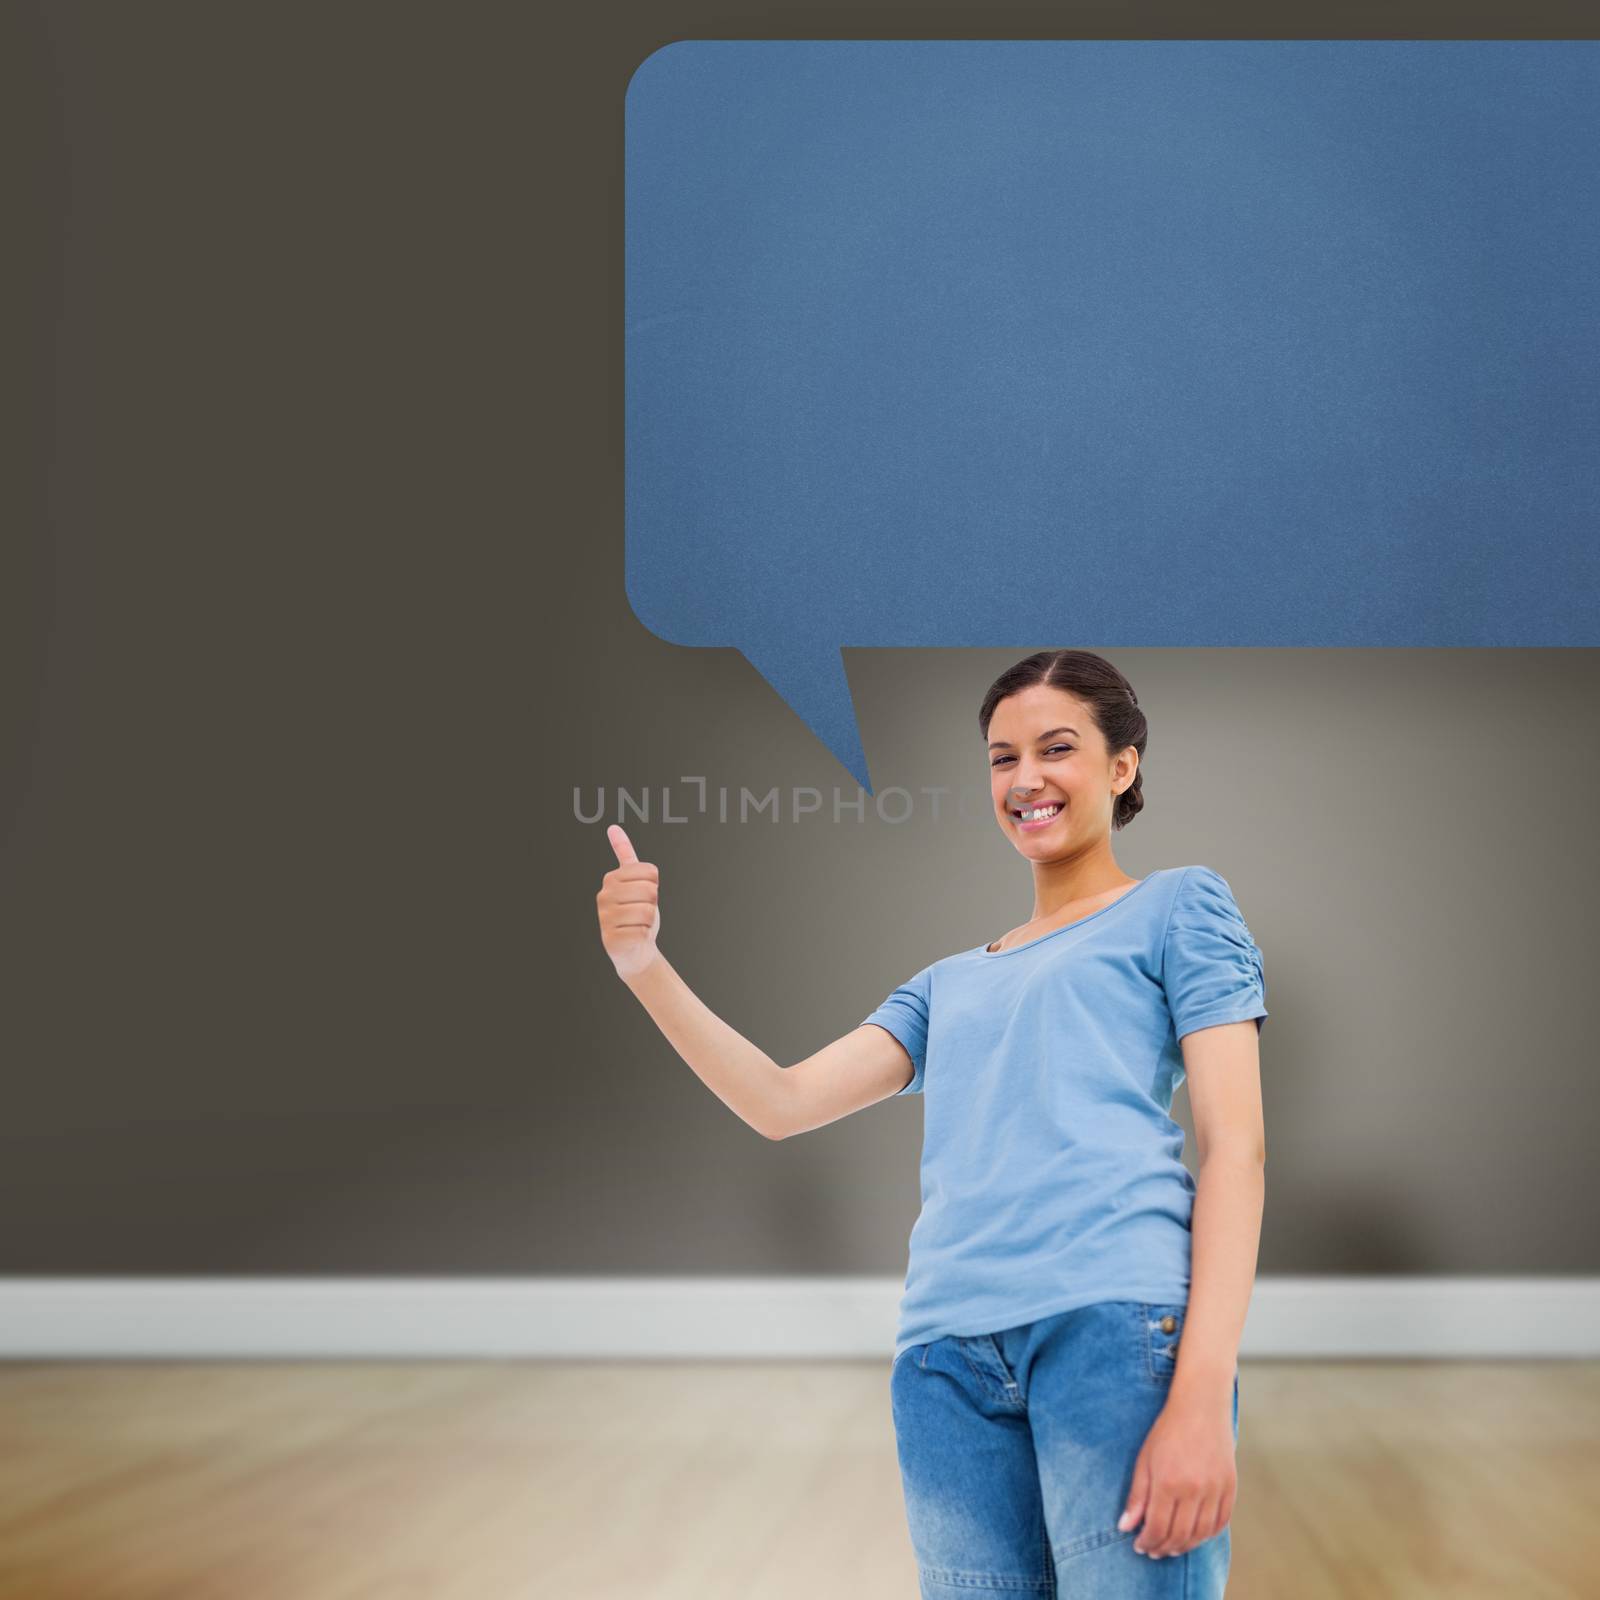 Pretty brunette giving thumbs up against speech bubble